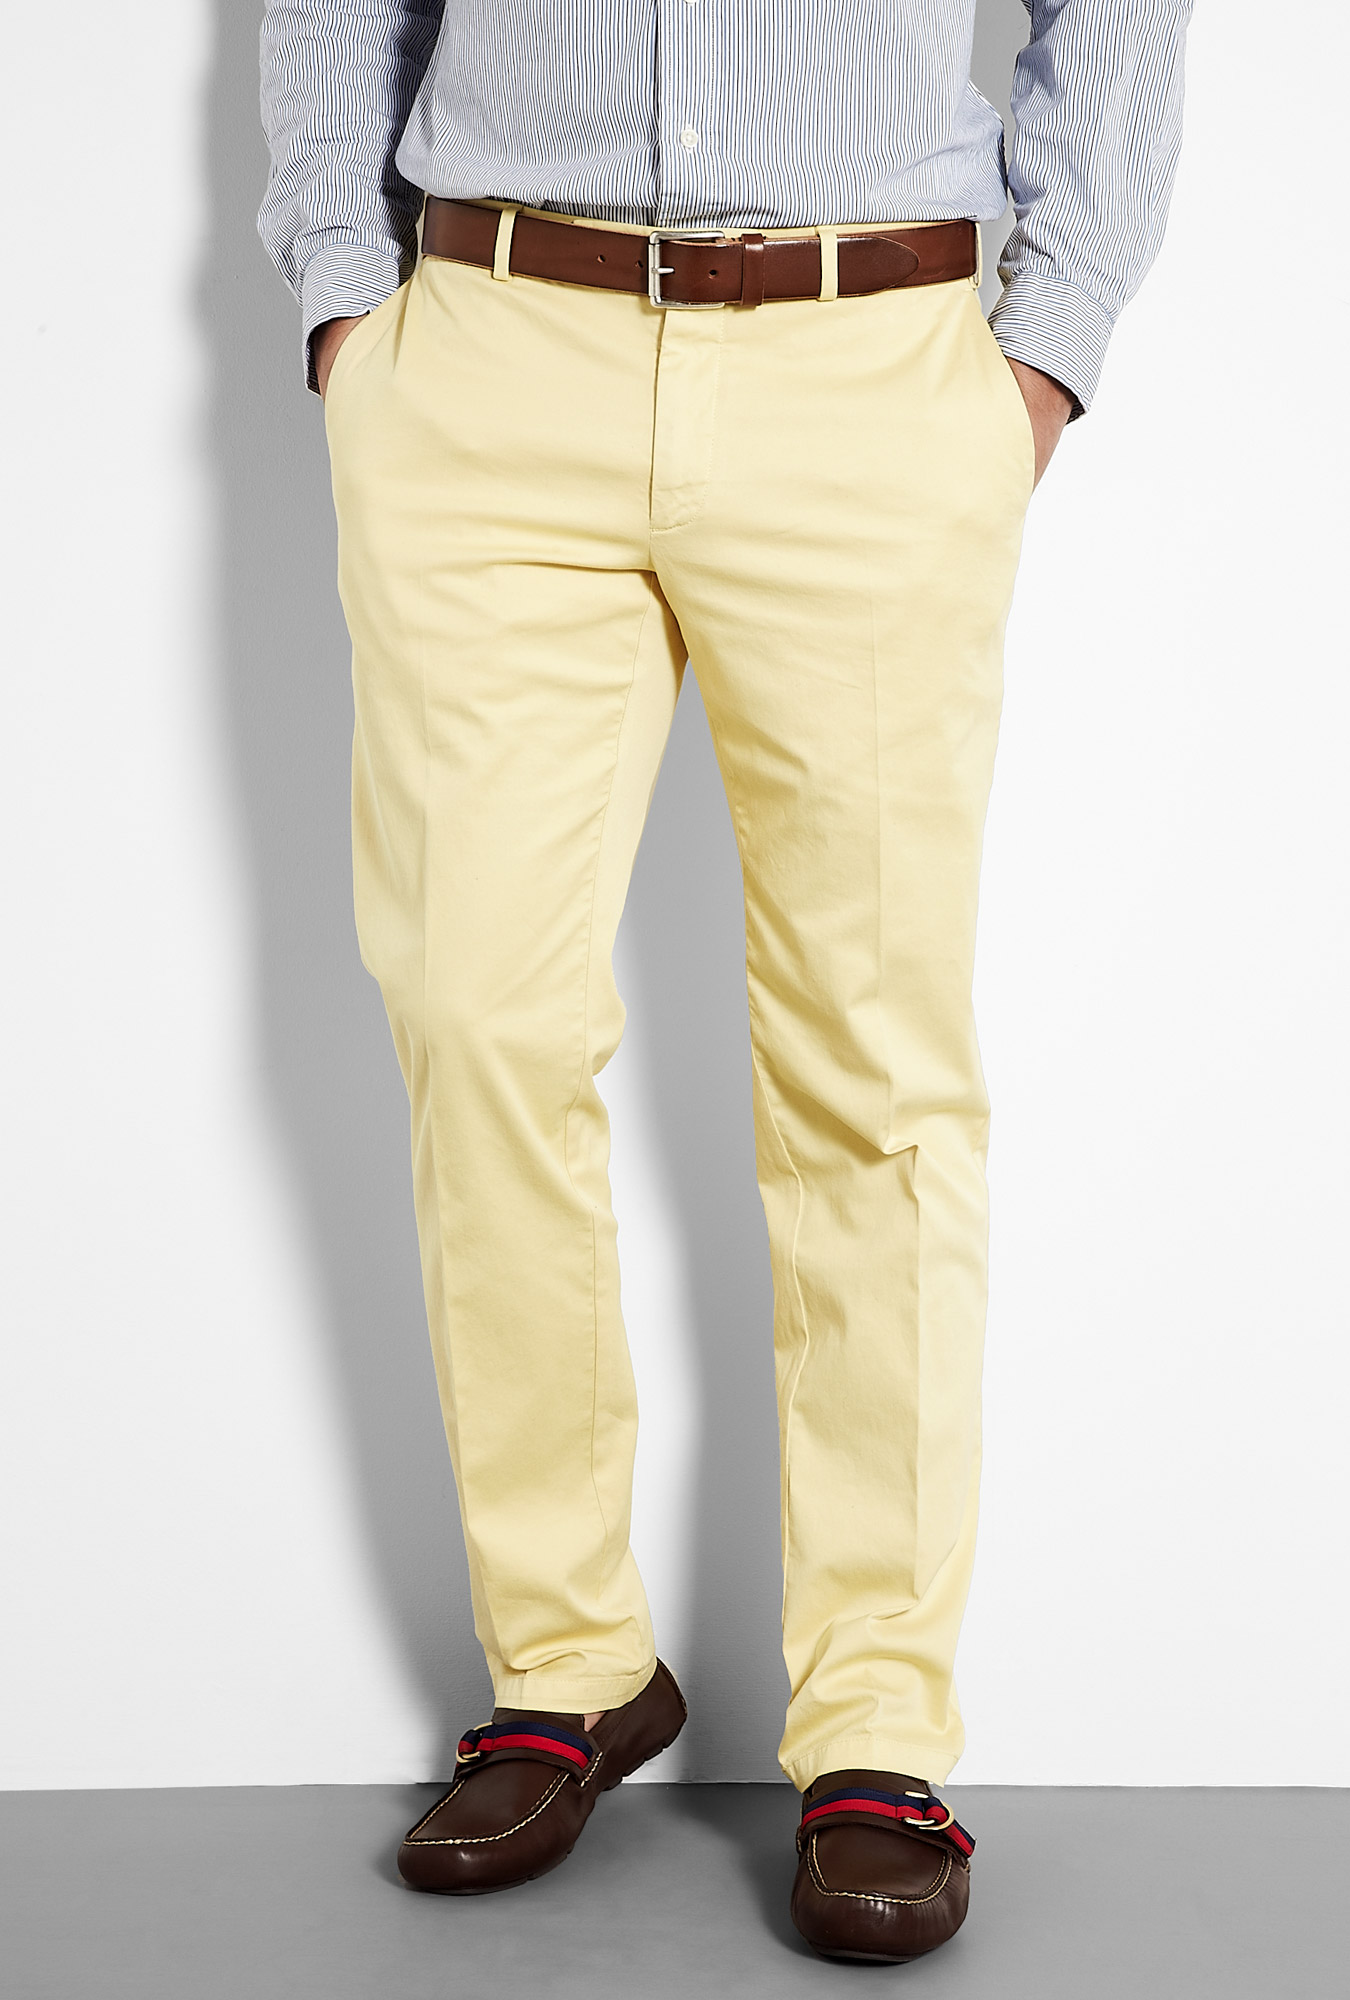 Polo Ralph Lauren Yellow Slim Fit Stretch Chinos in Yellow for Men | Lyst